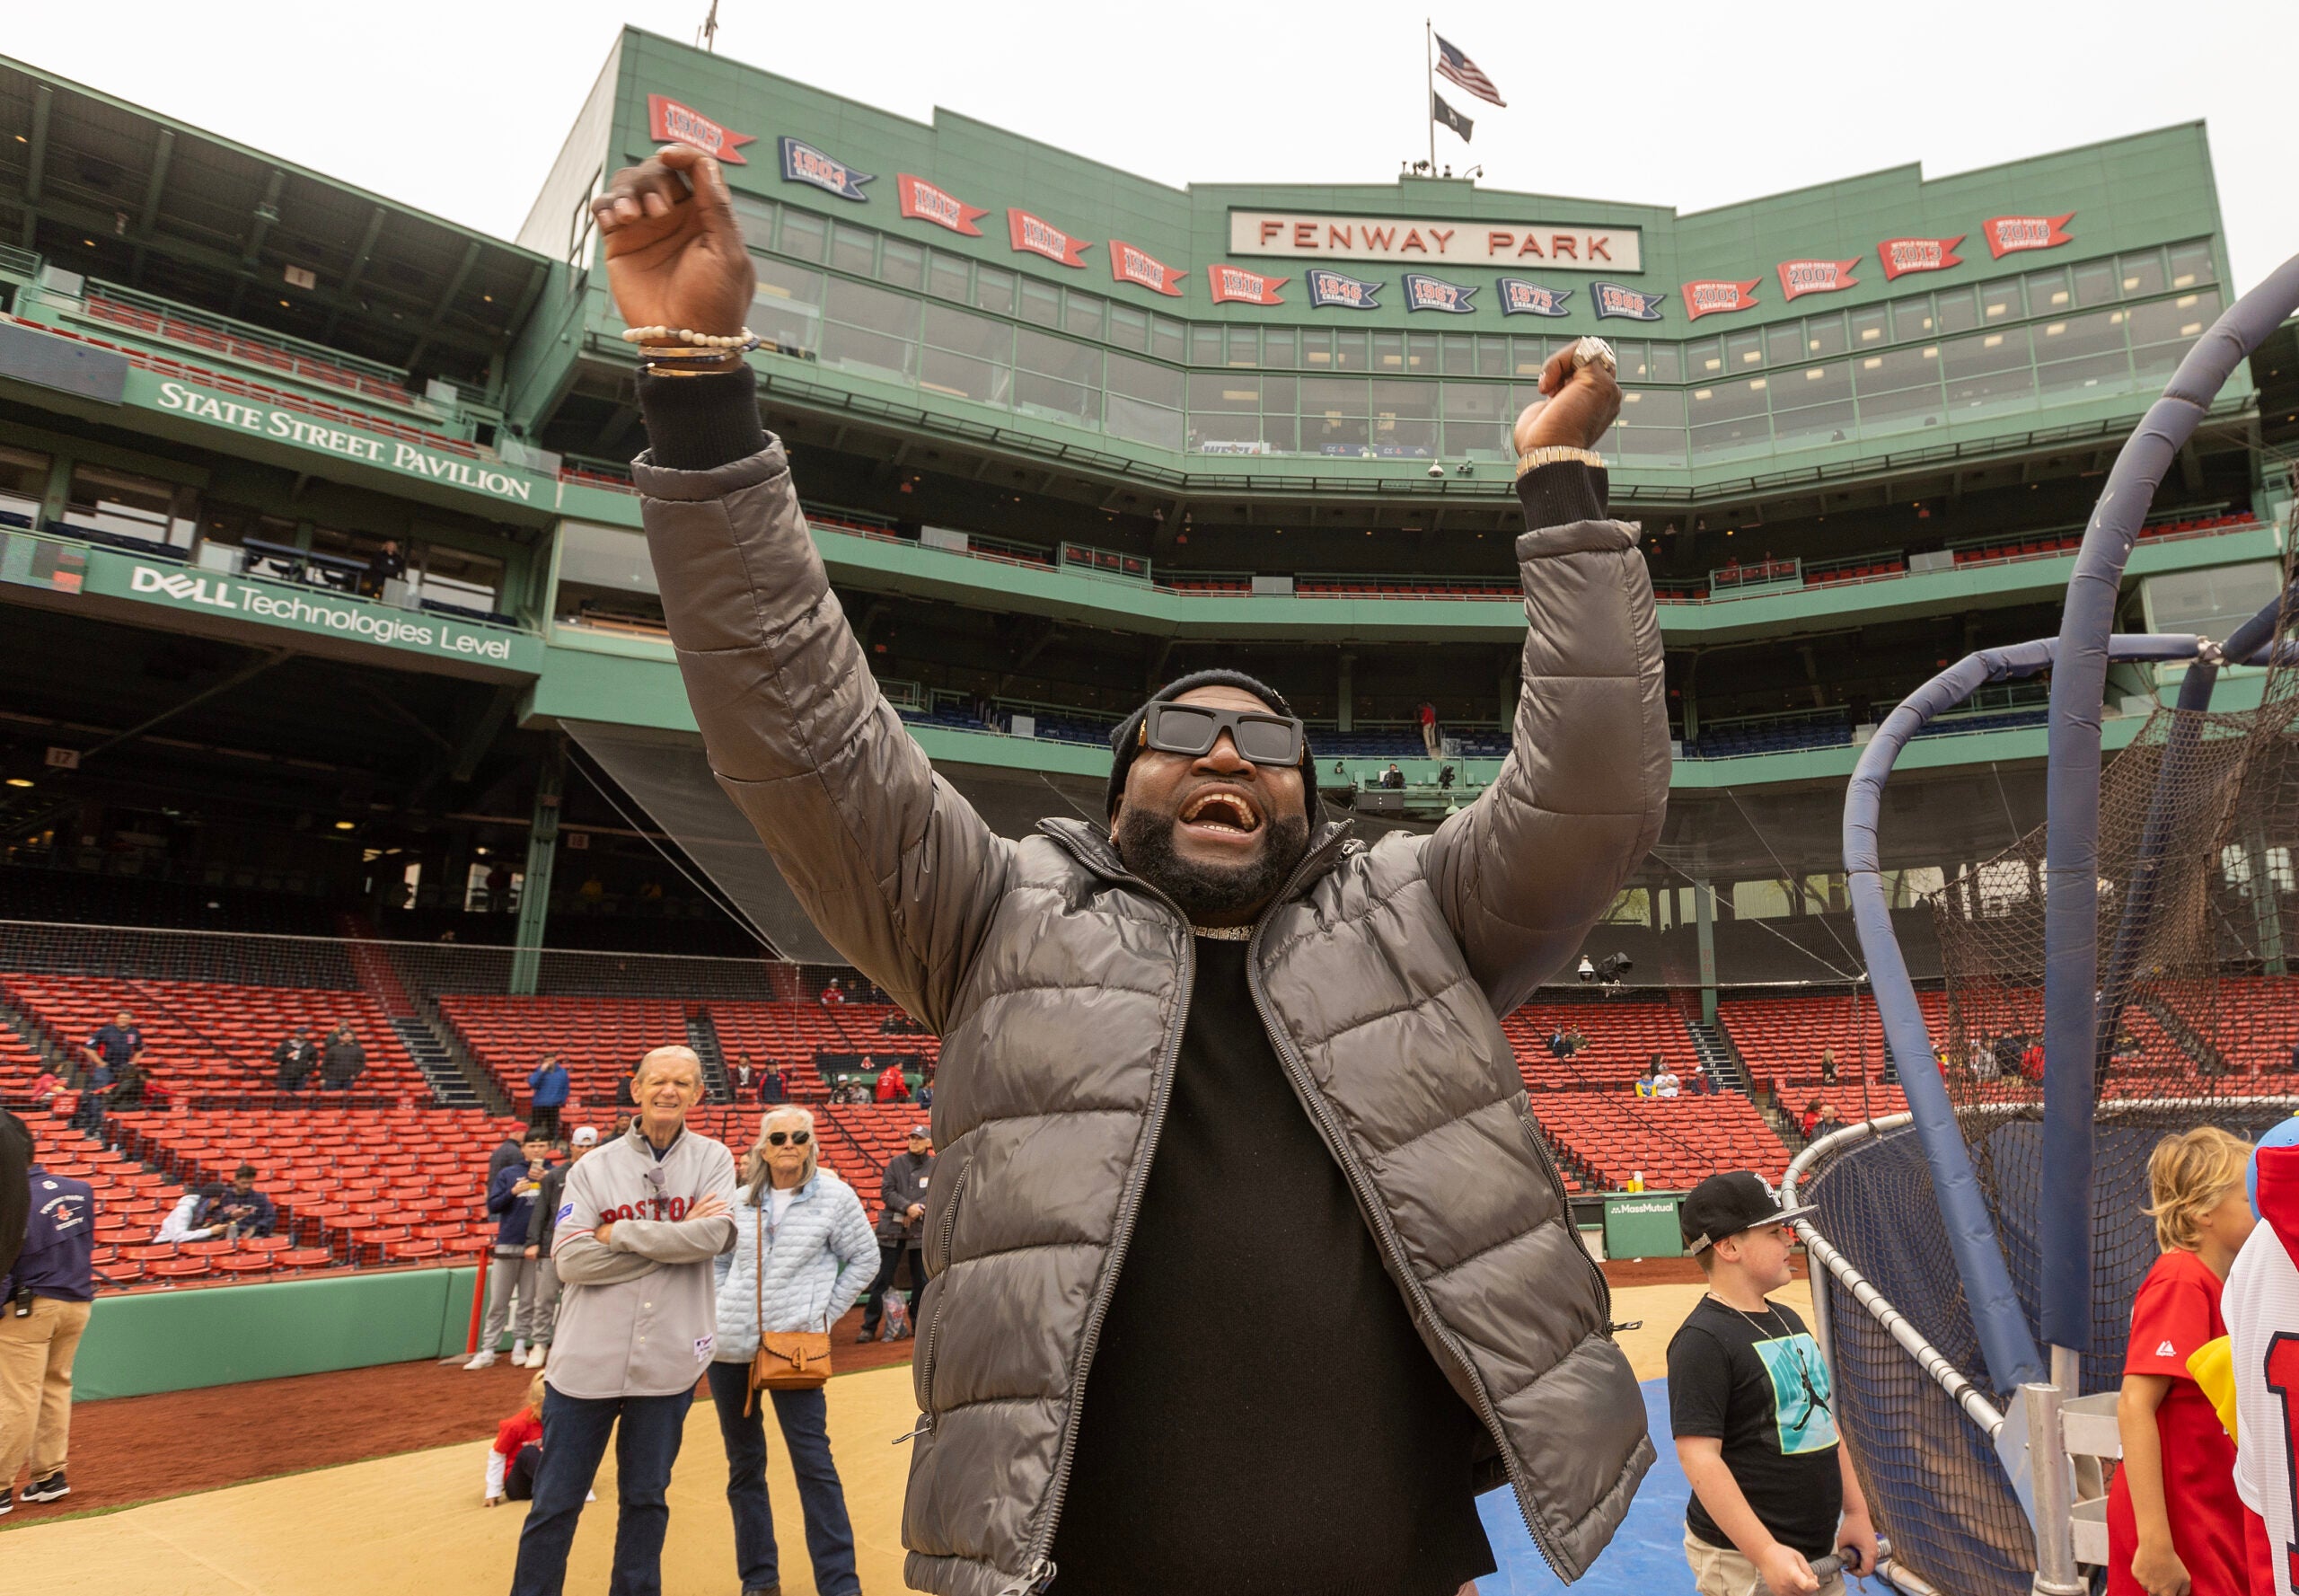 David Ortiz at a reunion of the Red Sox 2013 championship team.